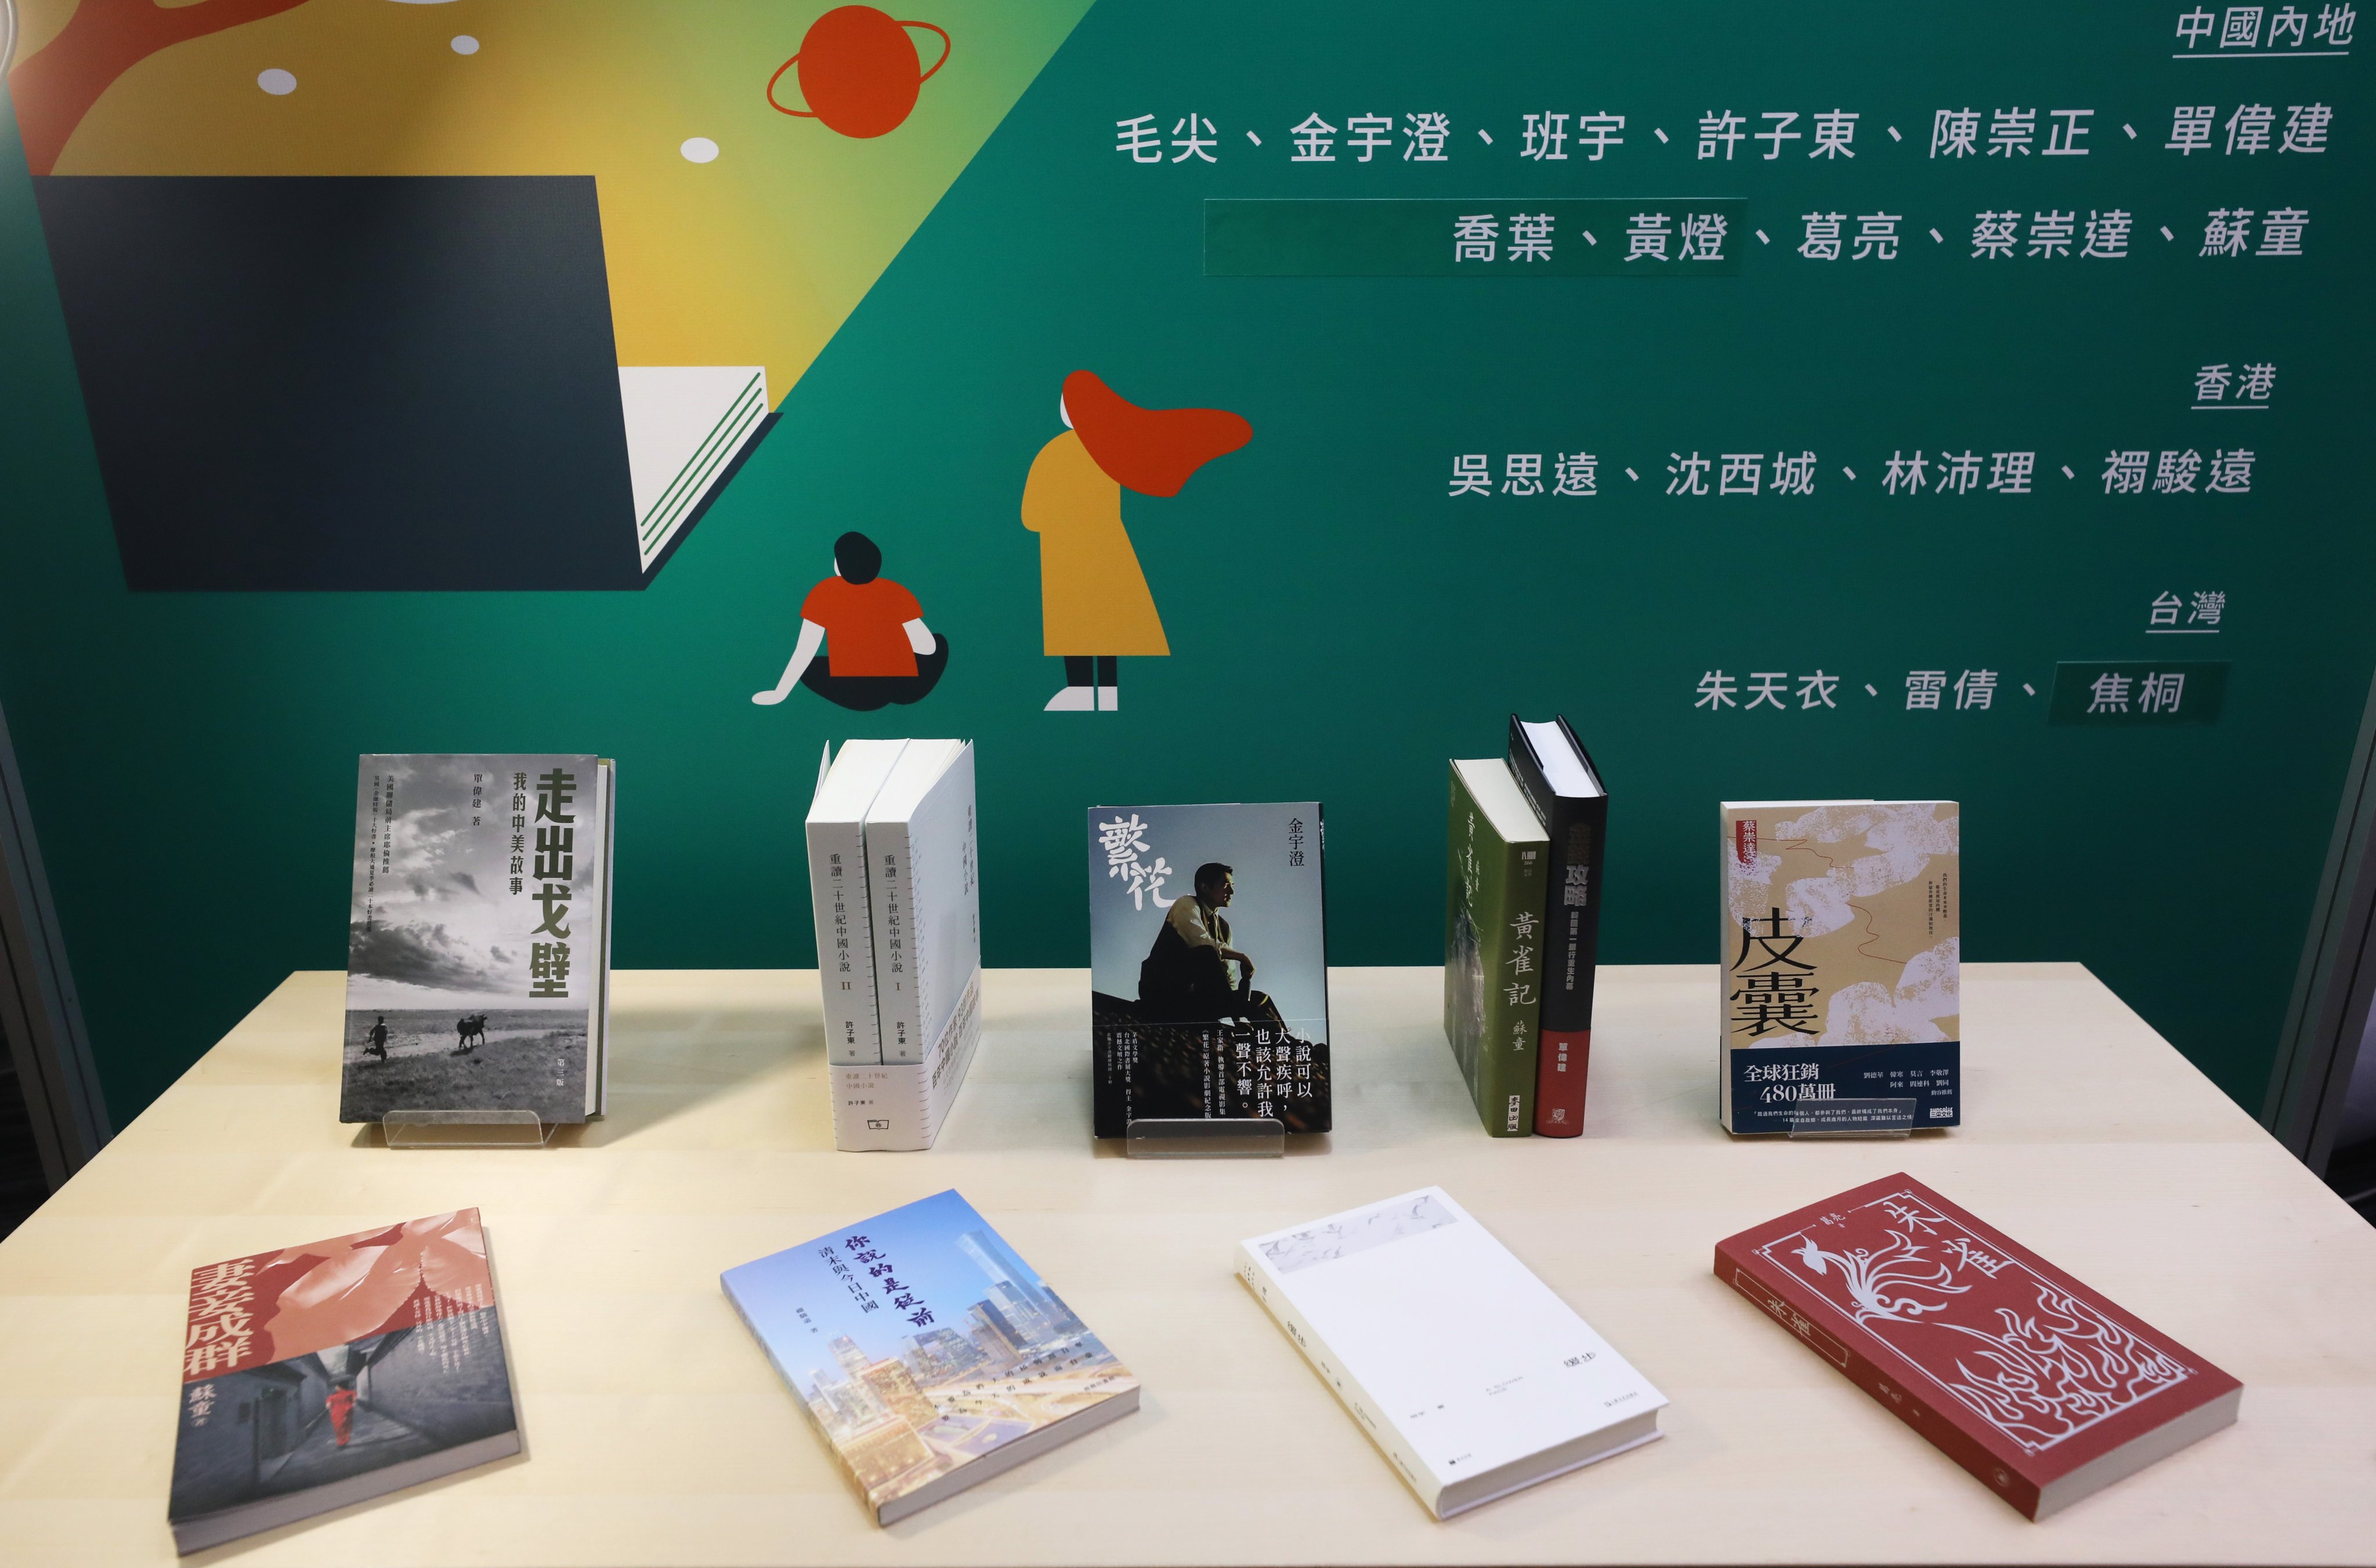 Some of the wares set to go on sale at the annual book fair. Photo: Sun Yeung